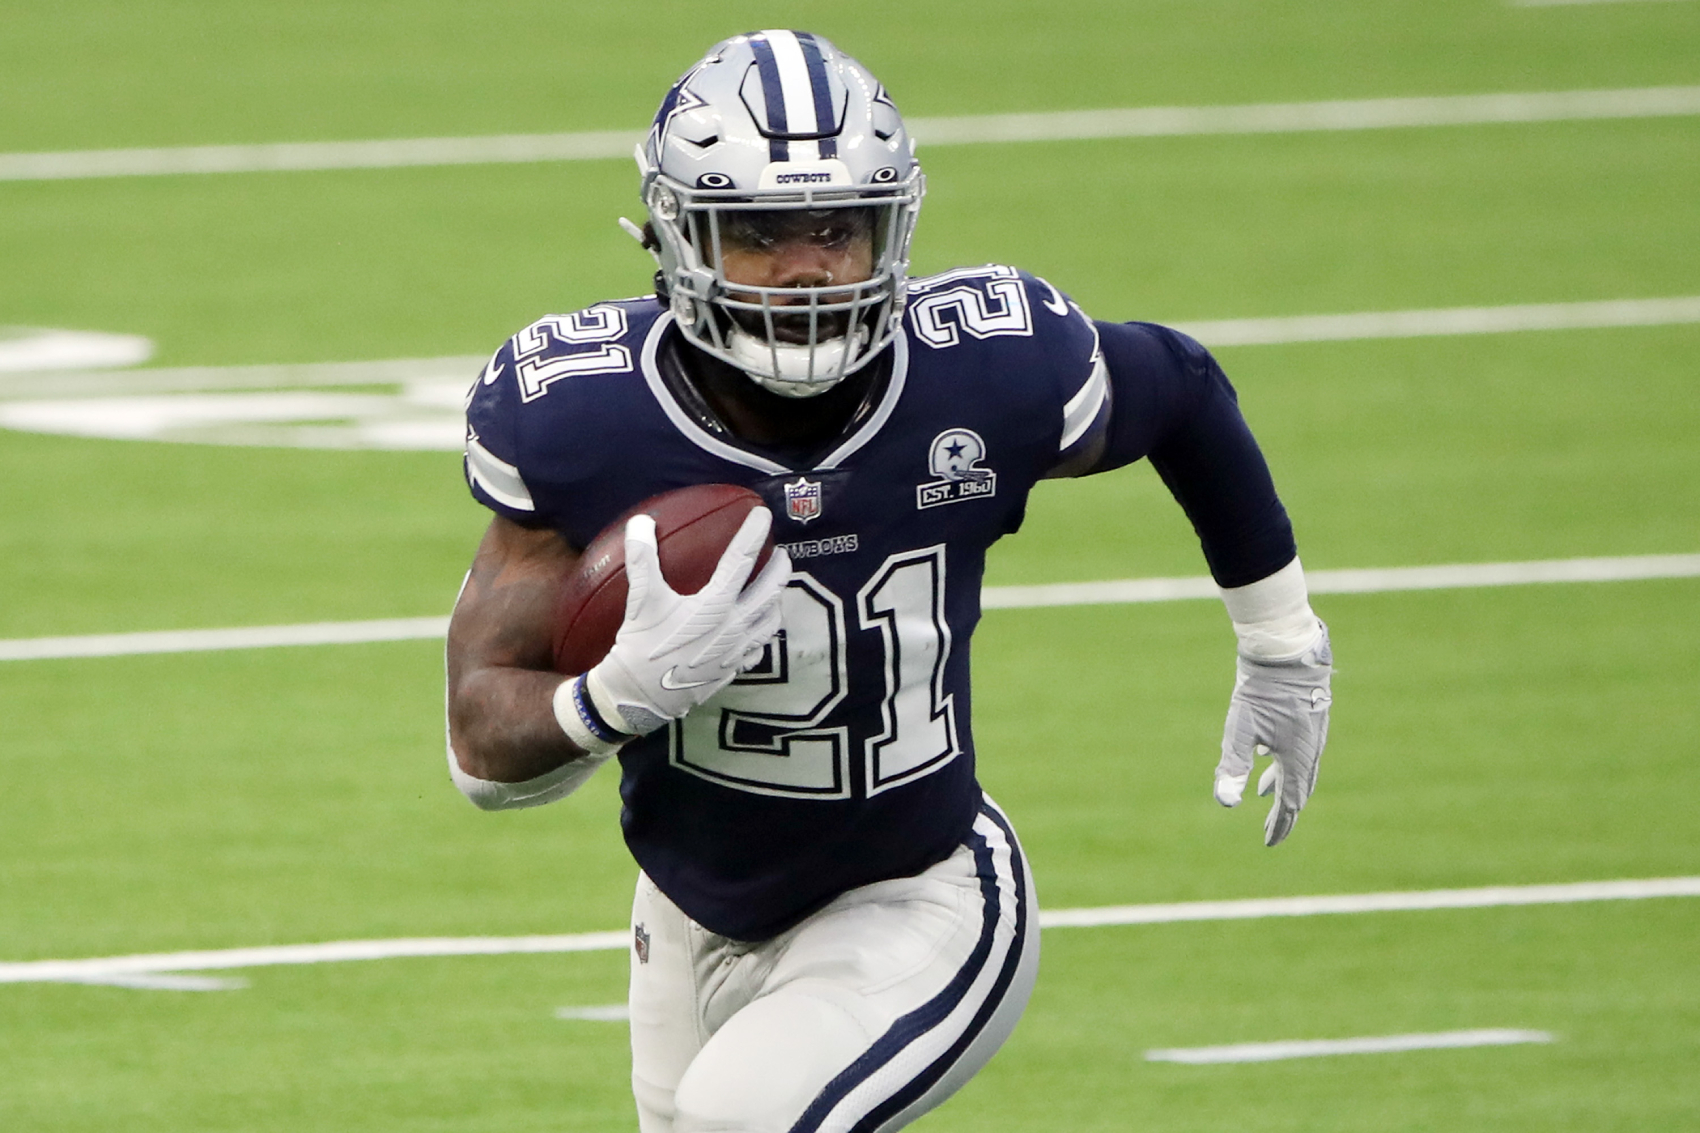 Ezekiel Elliott Has an Underrated Skill That Can Take the Cowboys To the Next Level